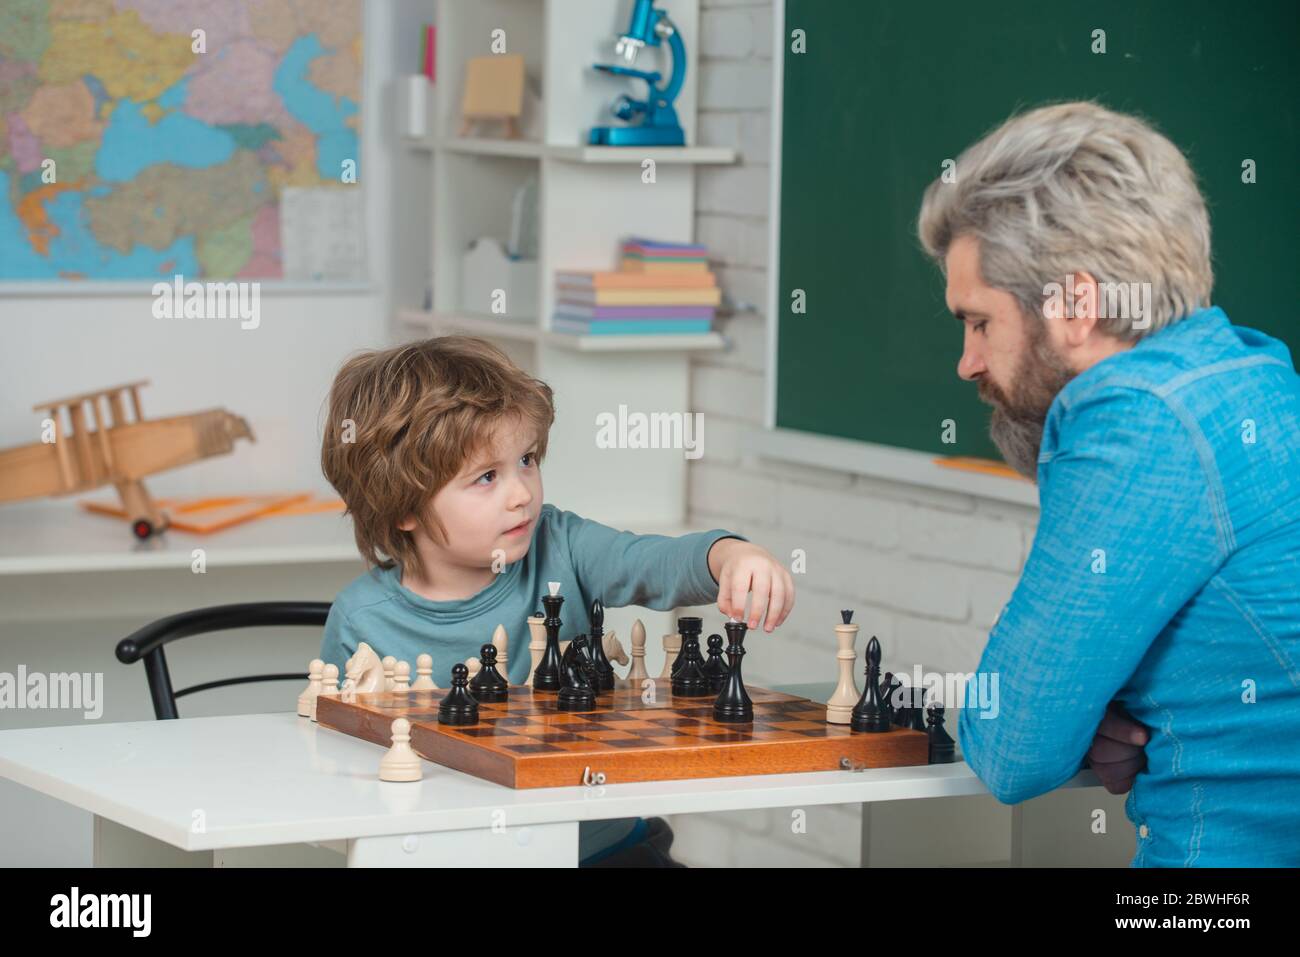 Chess success and winning. Family relationship with son. Cute boy developing chess strategy. Concept of education and teaching. Educational games. Stock Photo